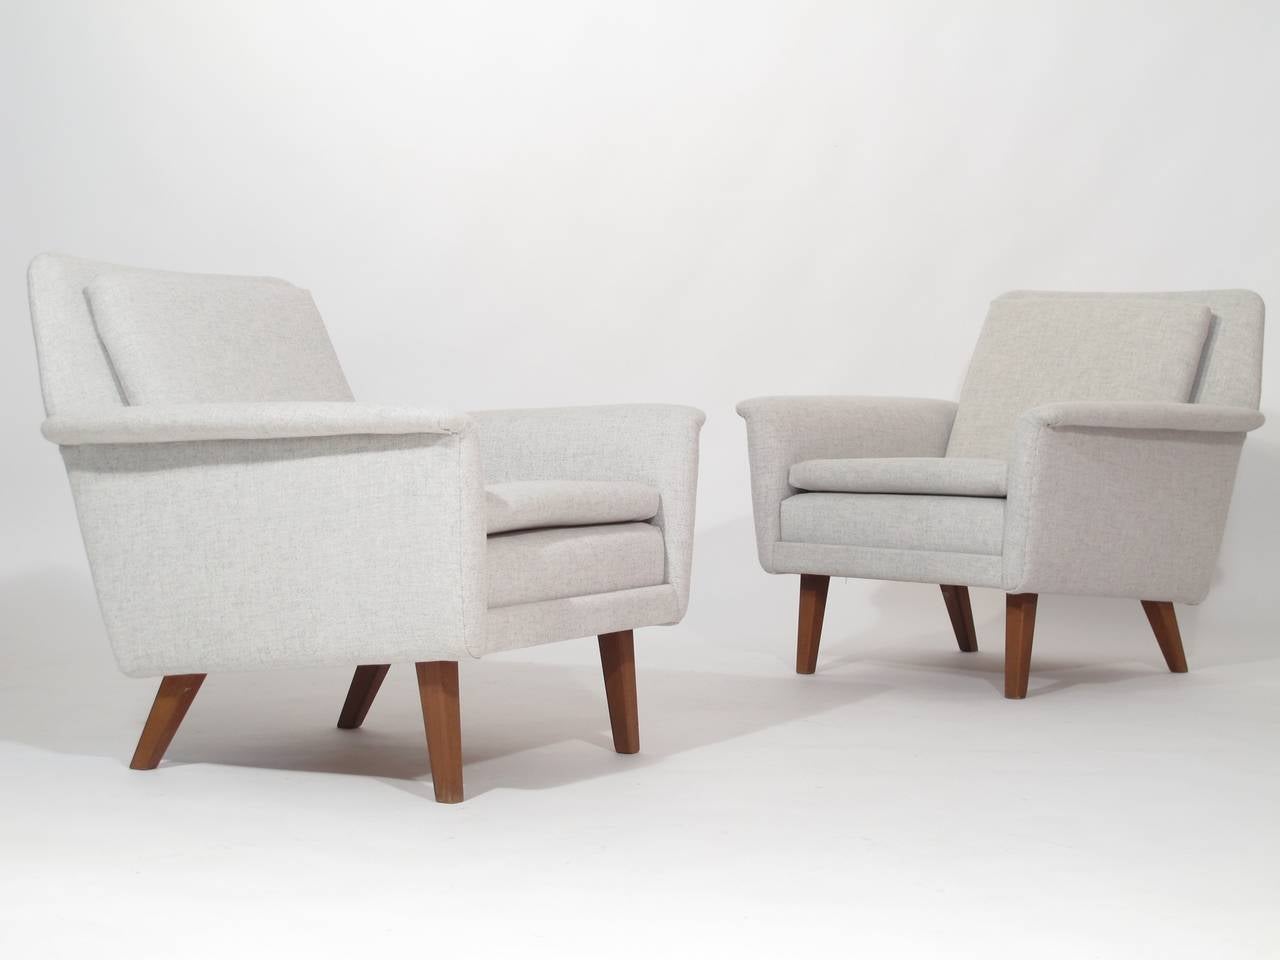 Pair of mid century Scandinavian upholstered lounge chairs designed by Hans Olsen and distributed by Illum Boligus, Denmark. Solid wood frame with loose seat and back cushions, newly upholstered in off-white Danish wool textile. Raised on tapered